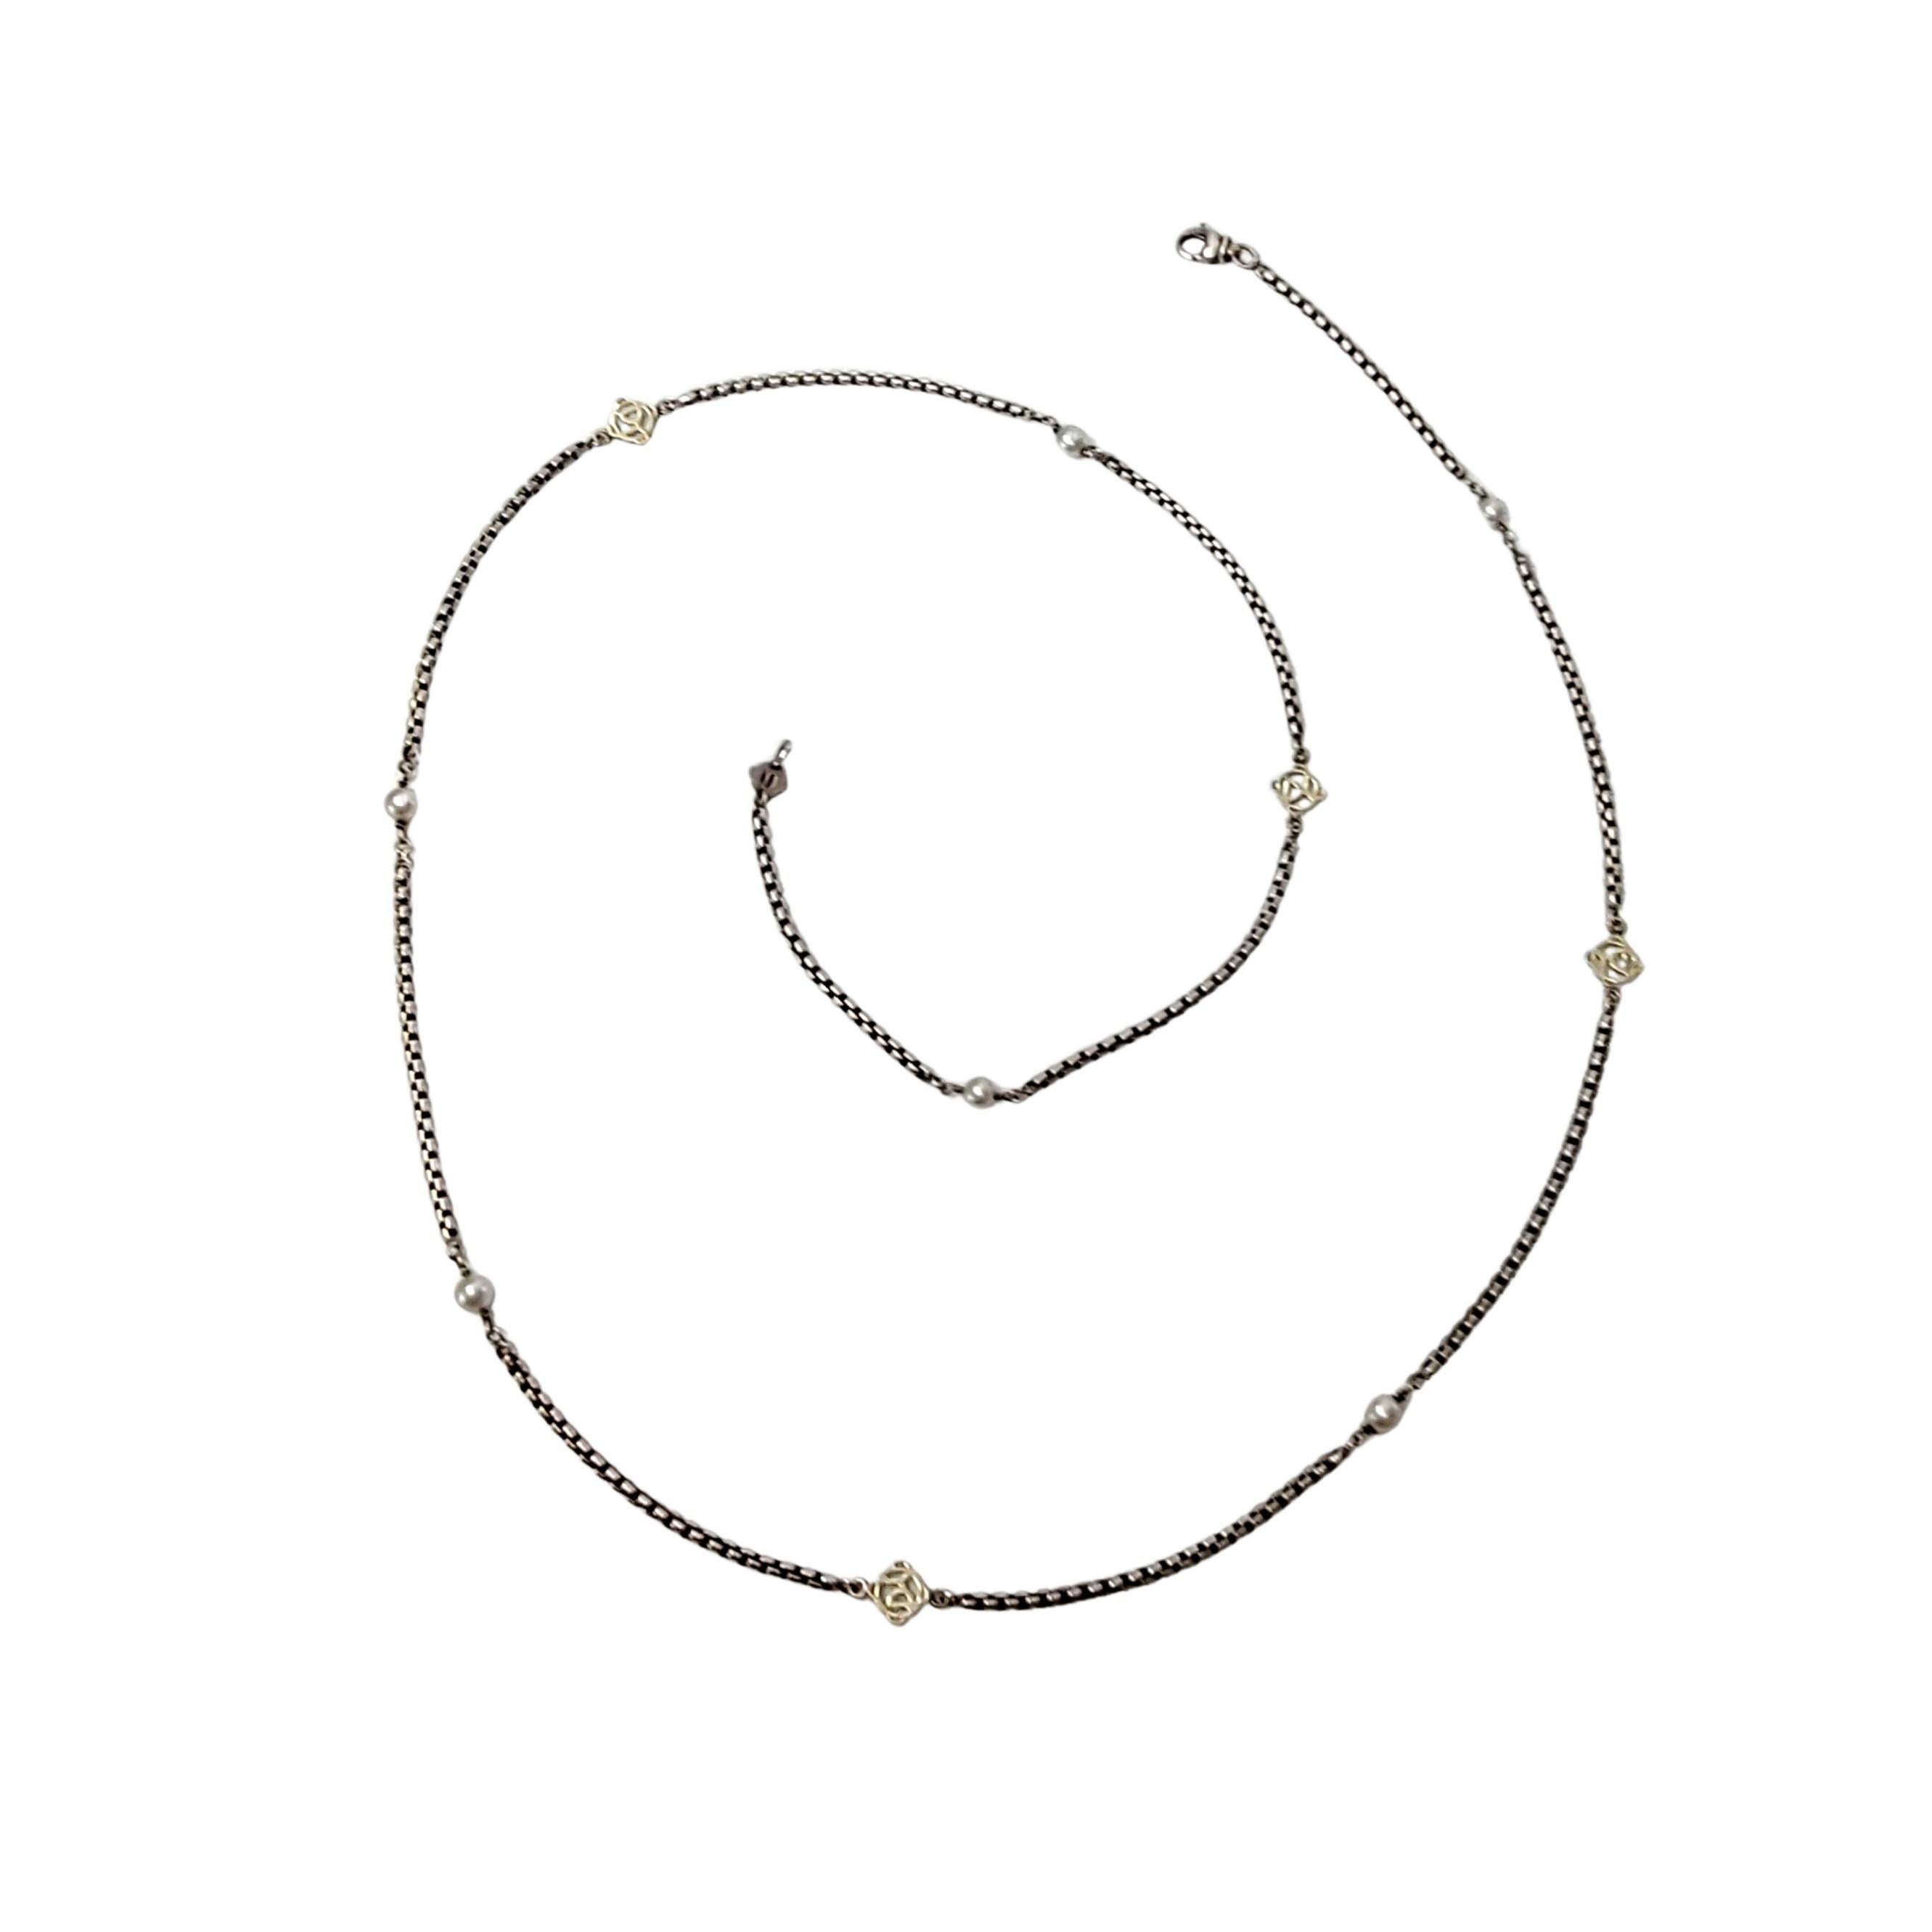 Sterling silver and 14K gold DY logo and pearl necklace by David Yurman.

Sterling silver box chain necklace with 14K yellow gold DY logos and cultured pearls. Lobster clasp closure.

Measures approx 31